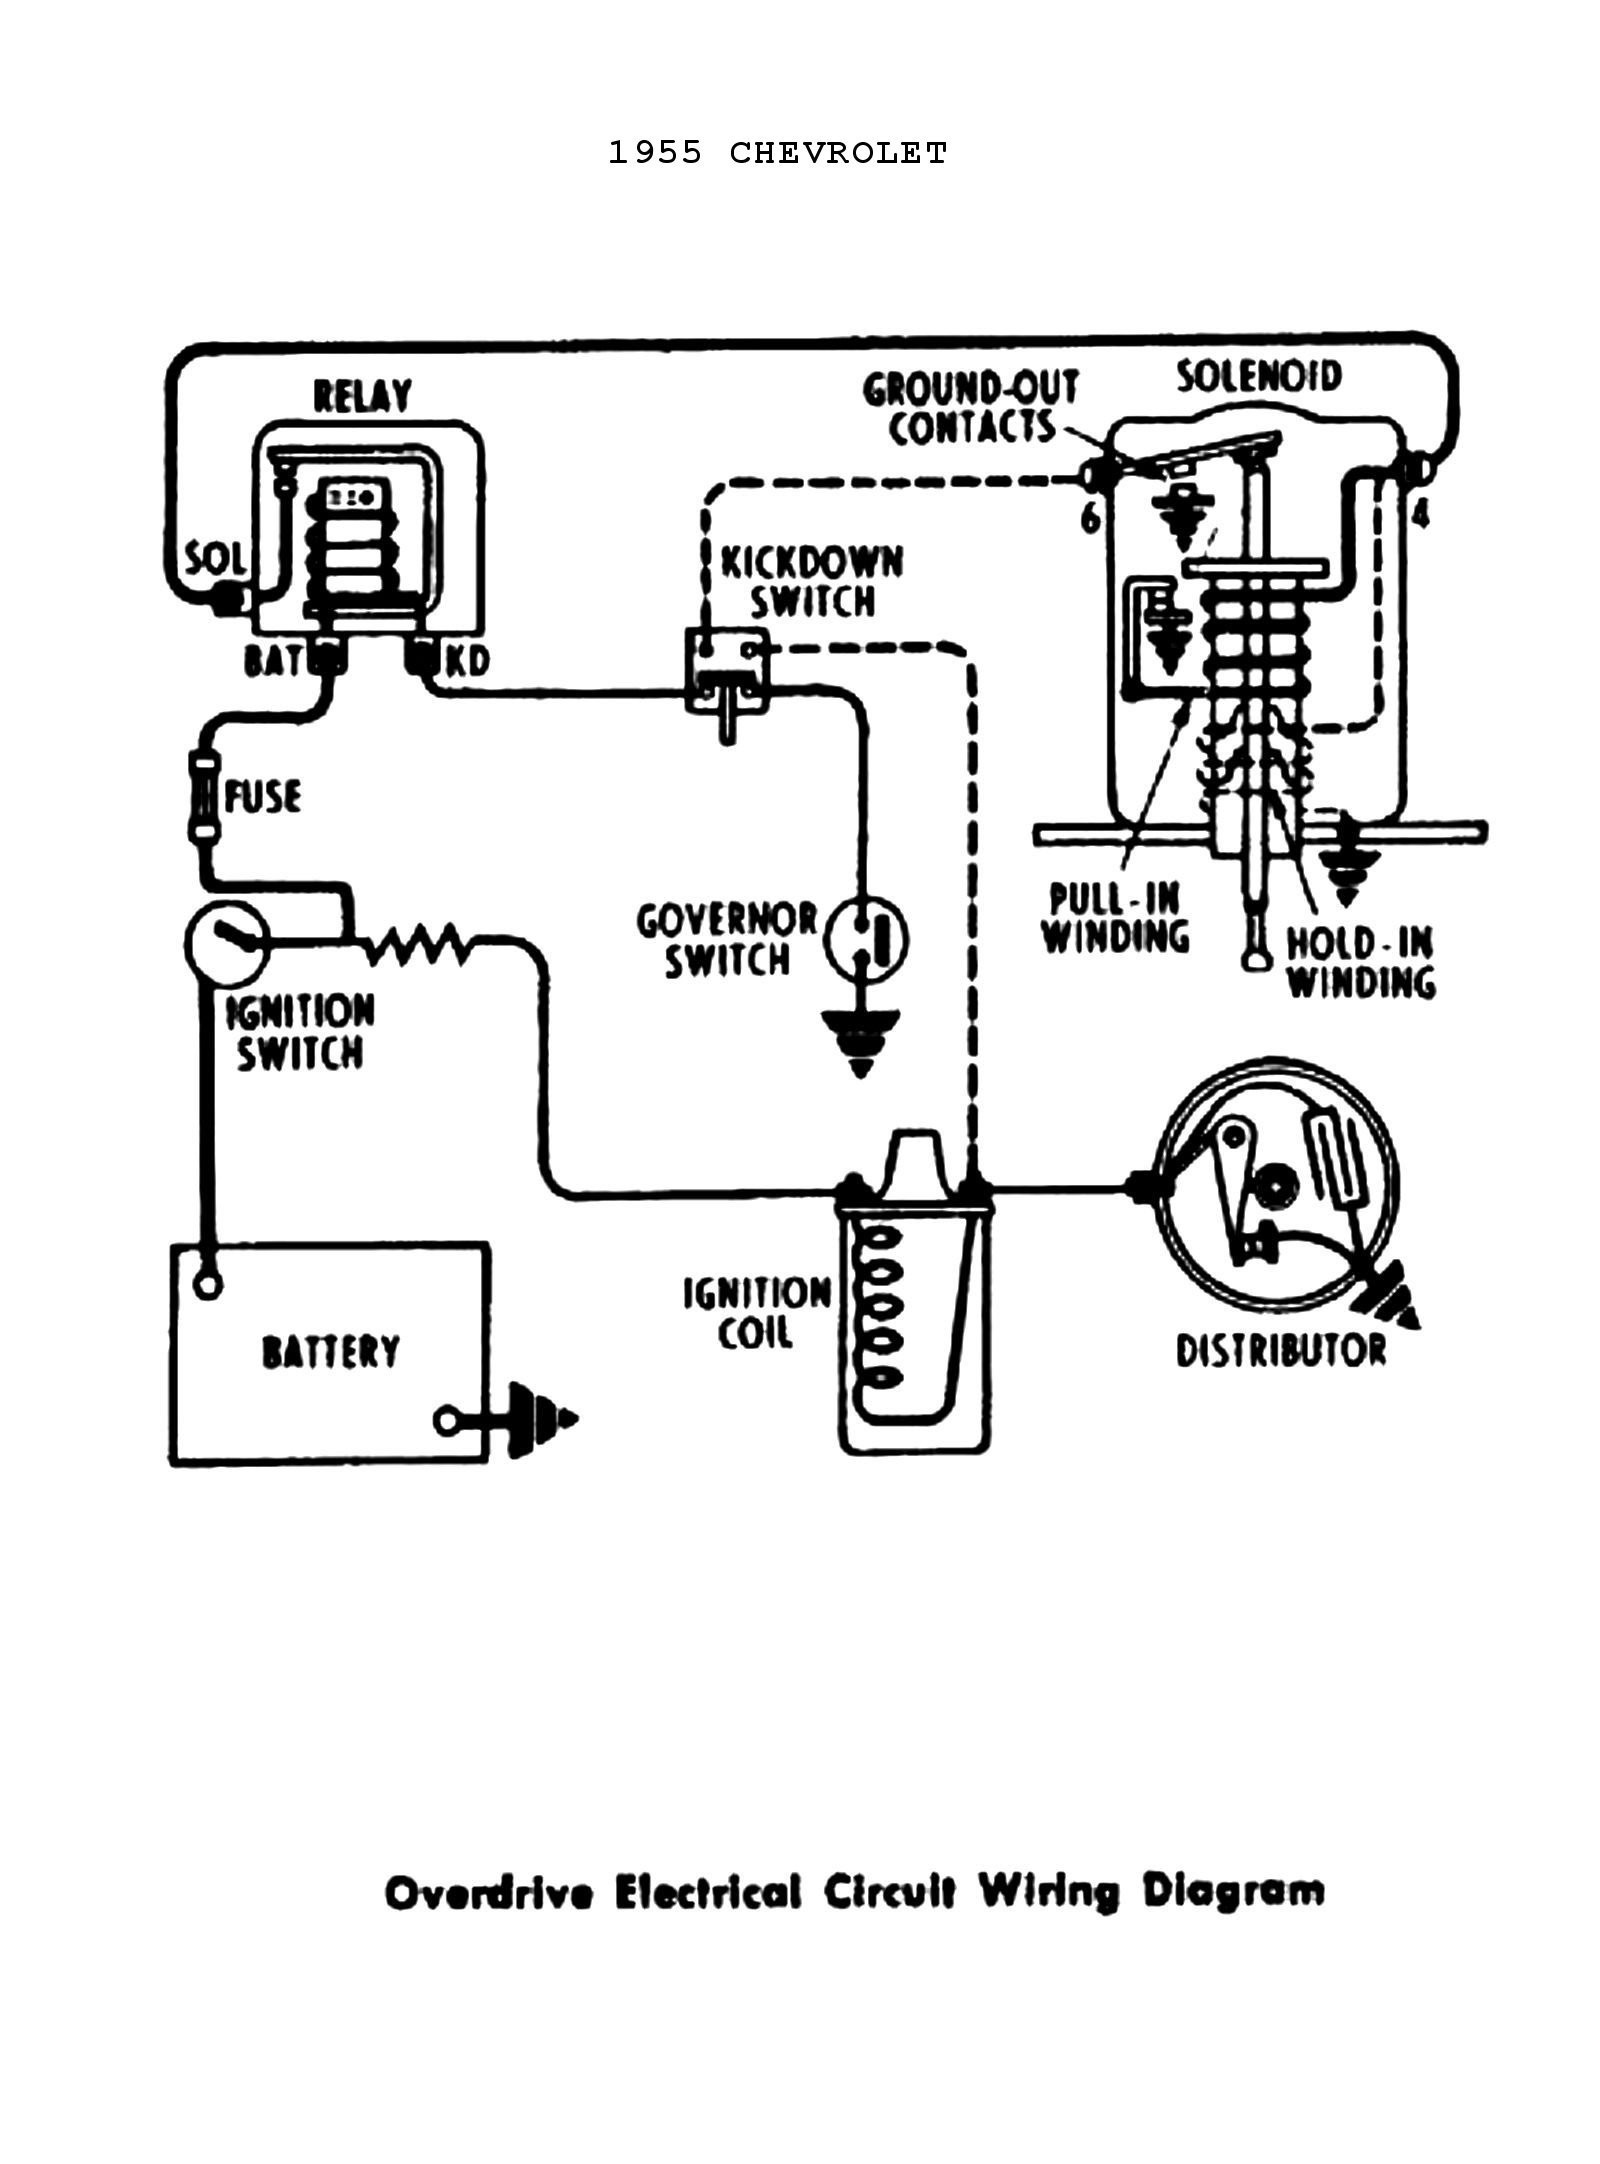 Ignition Coil Wiring Diagram Collection 1955 Power Windows & Seats · 1955 Overdrive Circuit Chevy